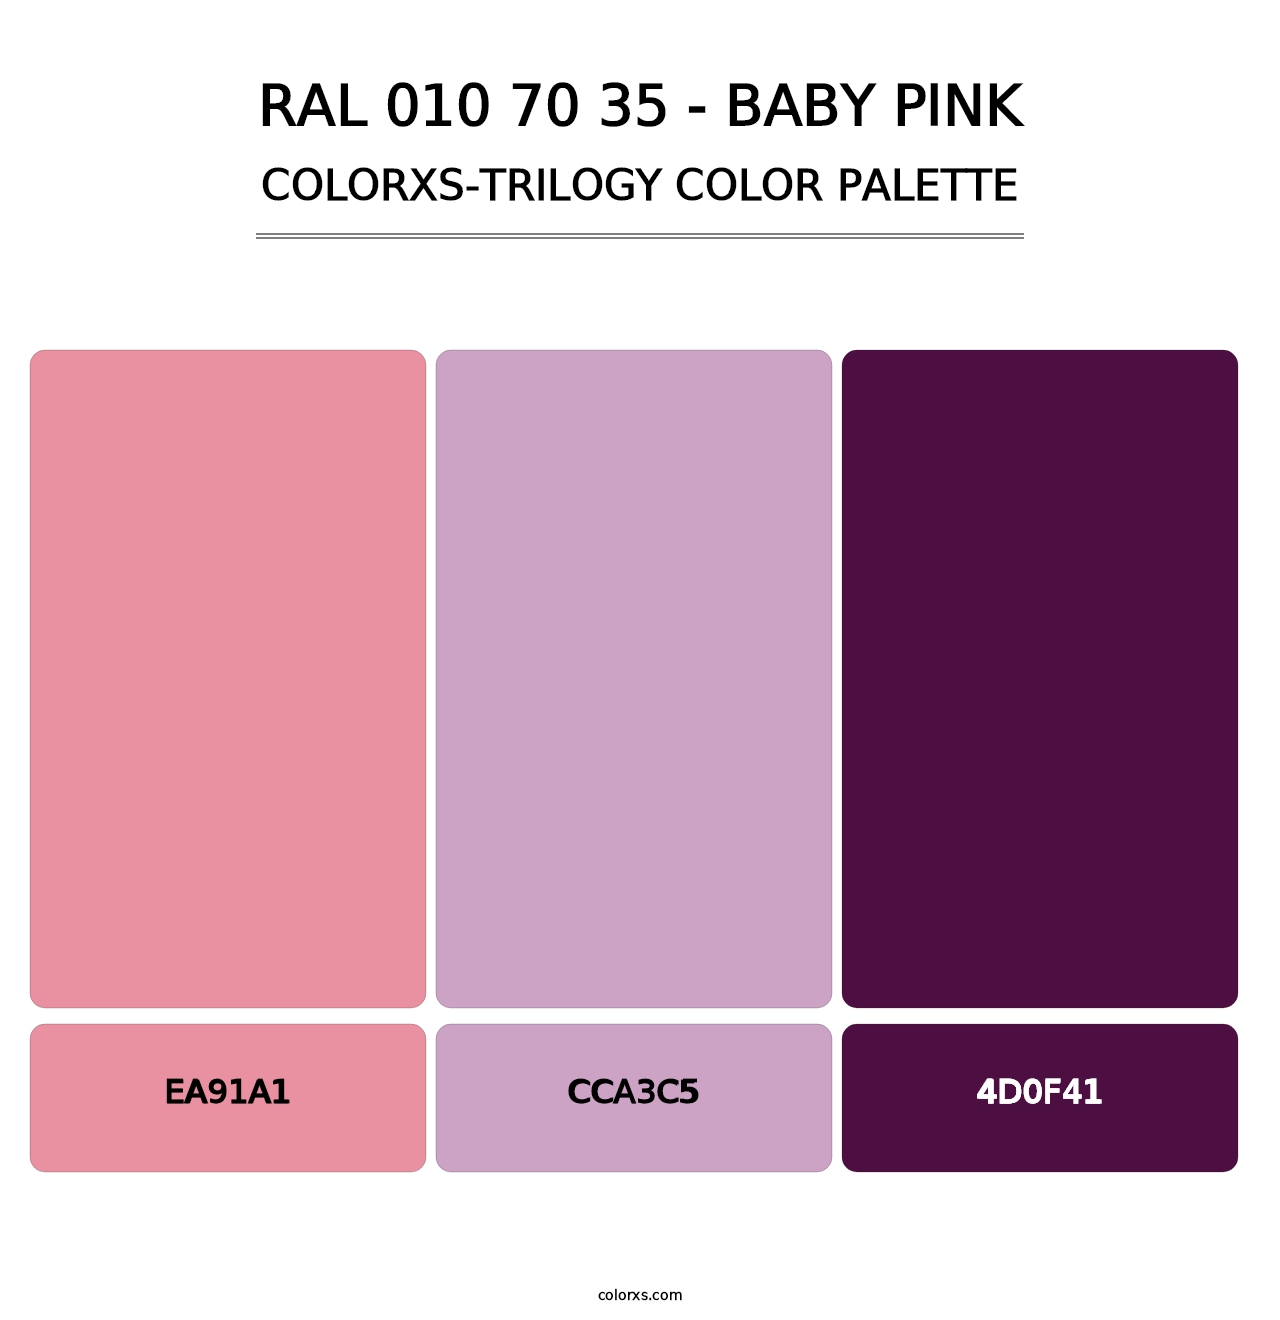 RAL 010 70 35 - Baby Pink - Colorxs Trilogy Palette